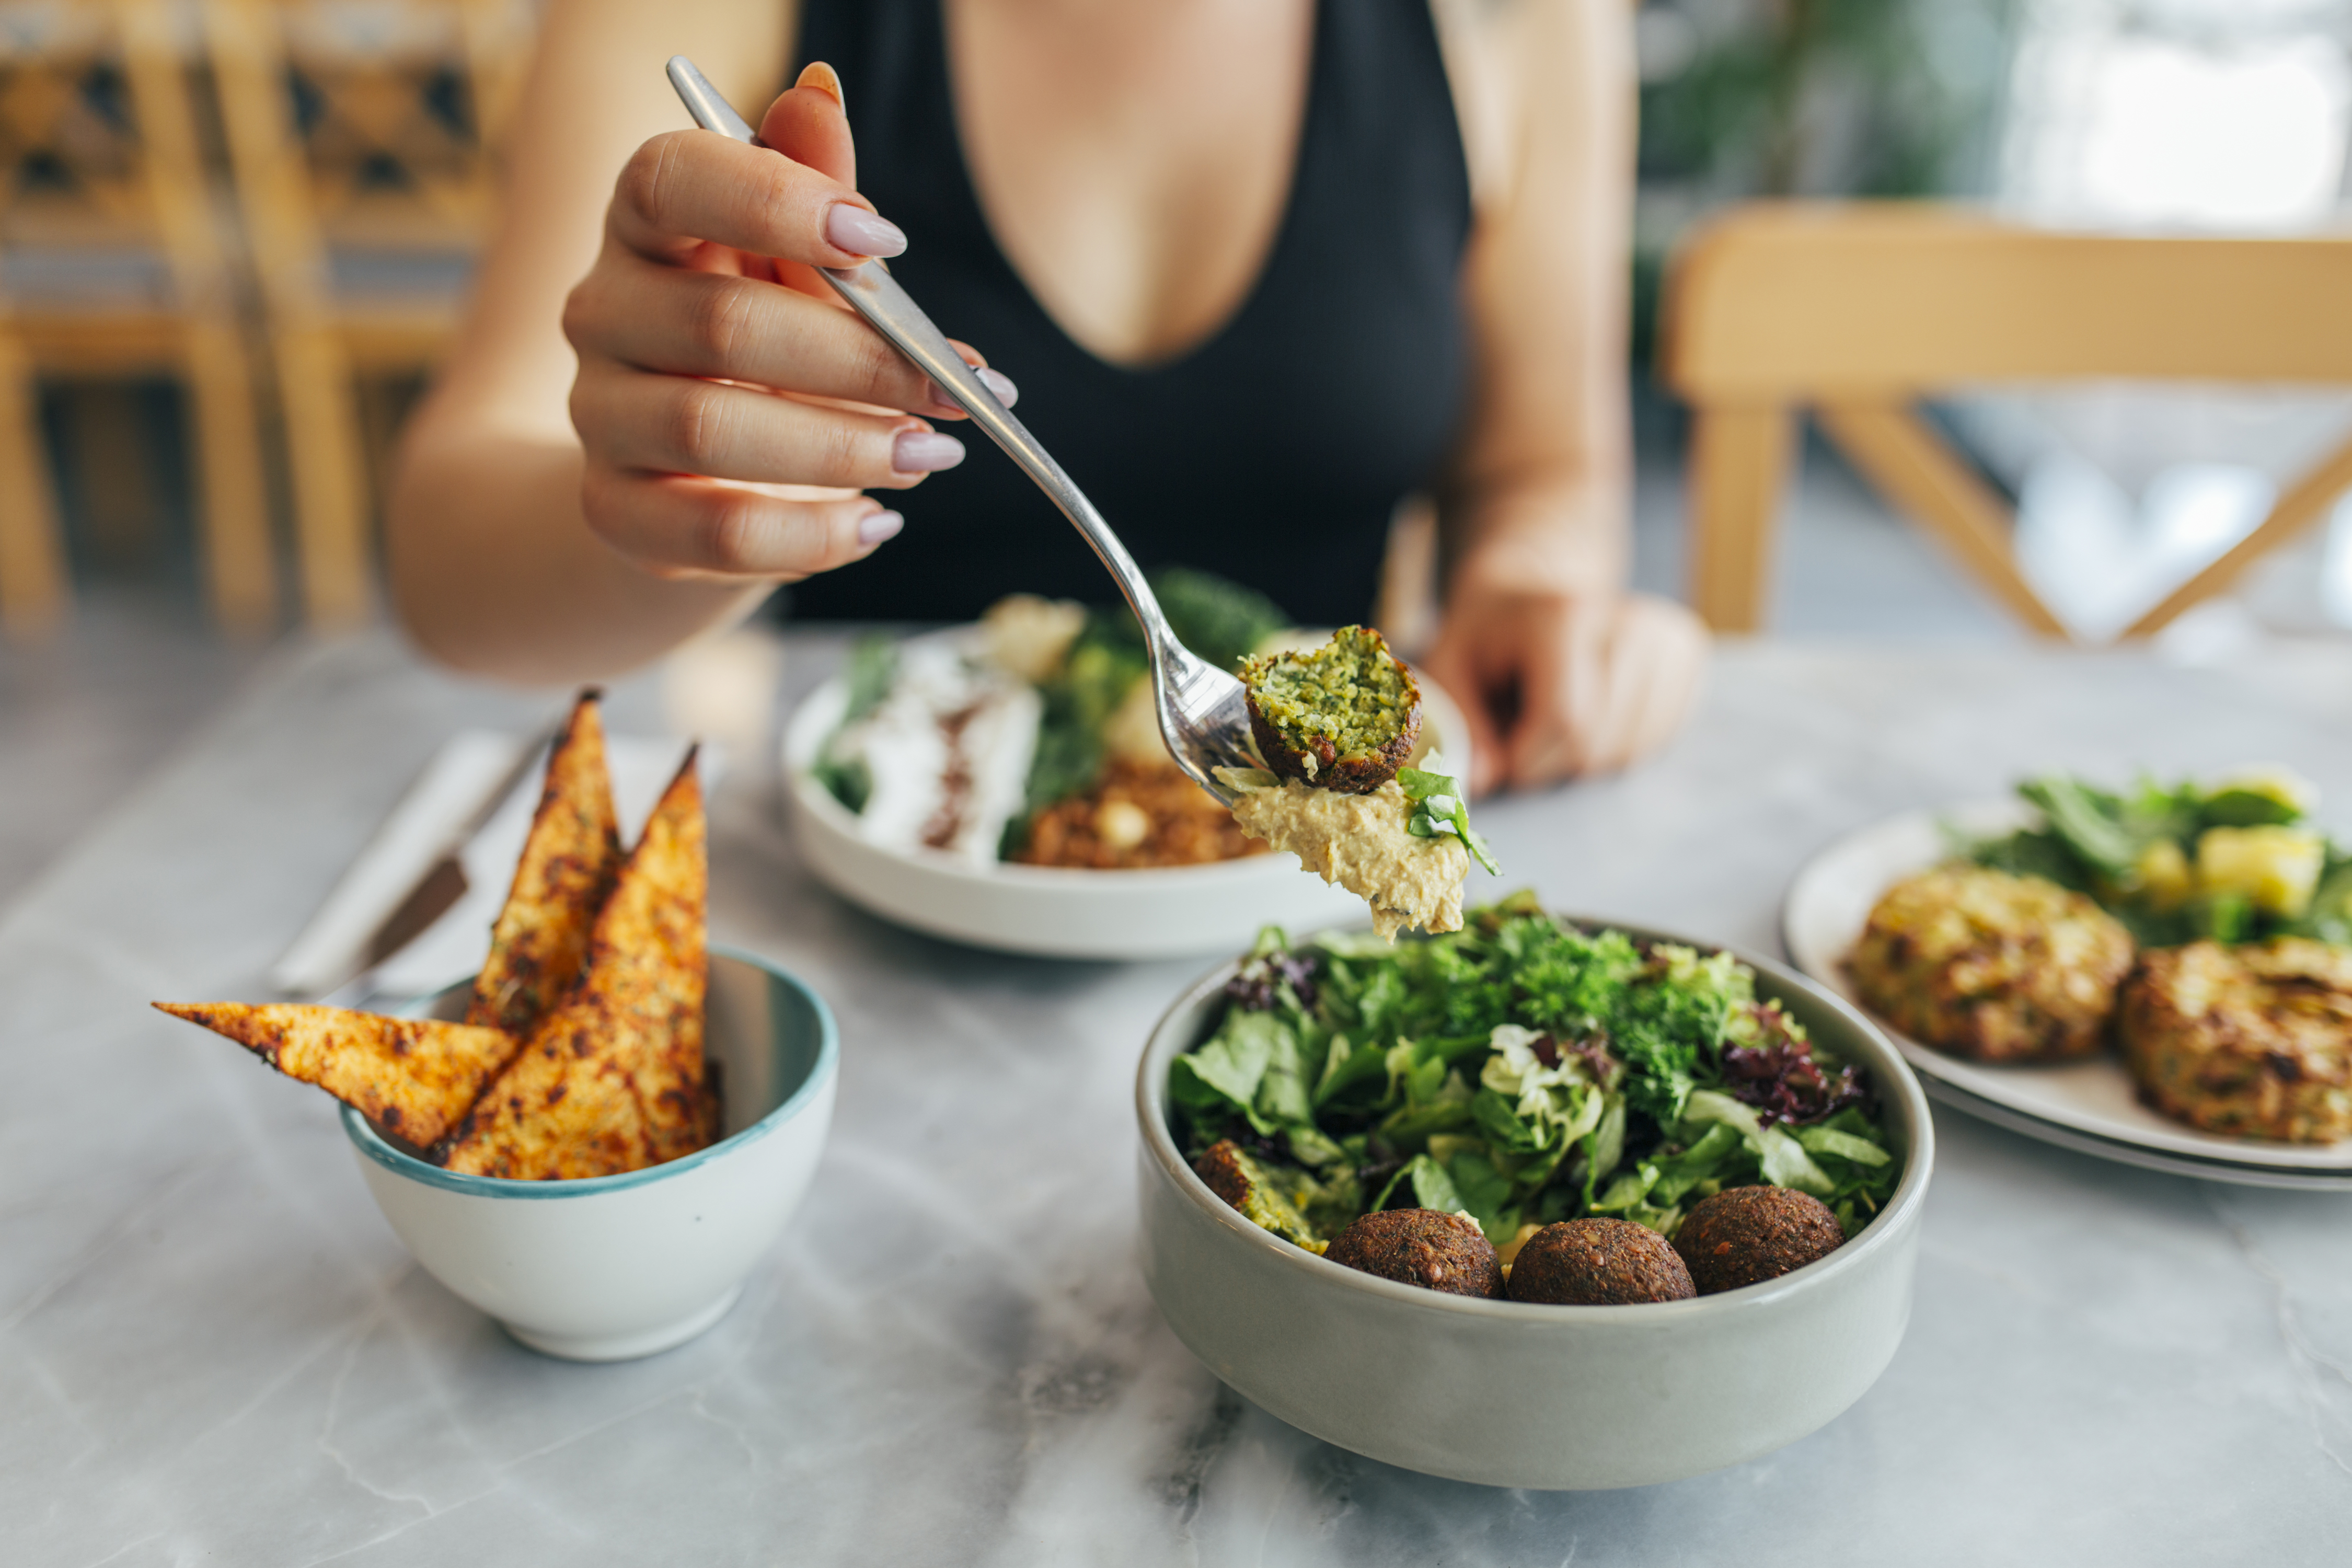 New research claims the traditional three meals a day is not the best way for humans to eat